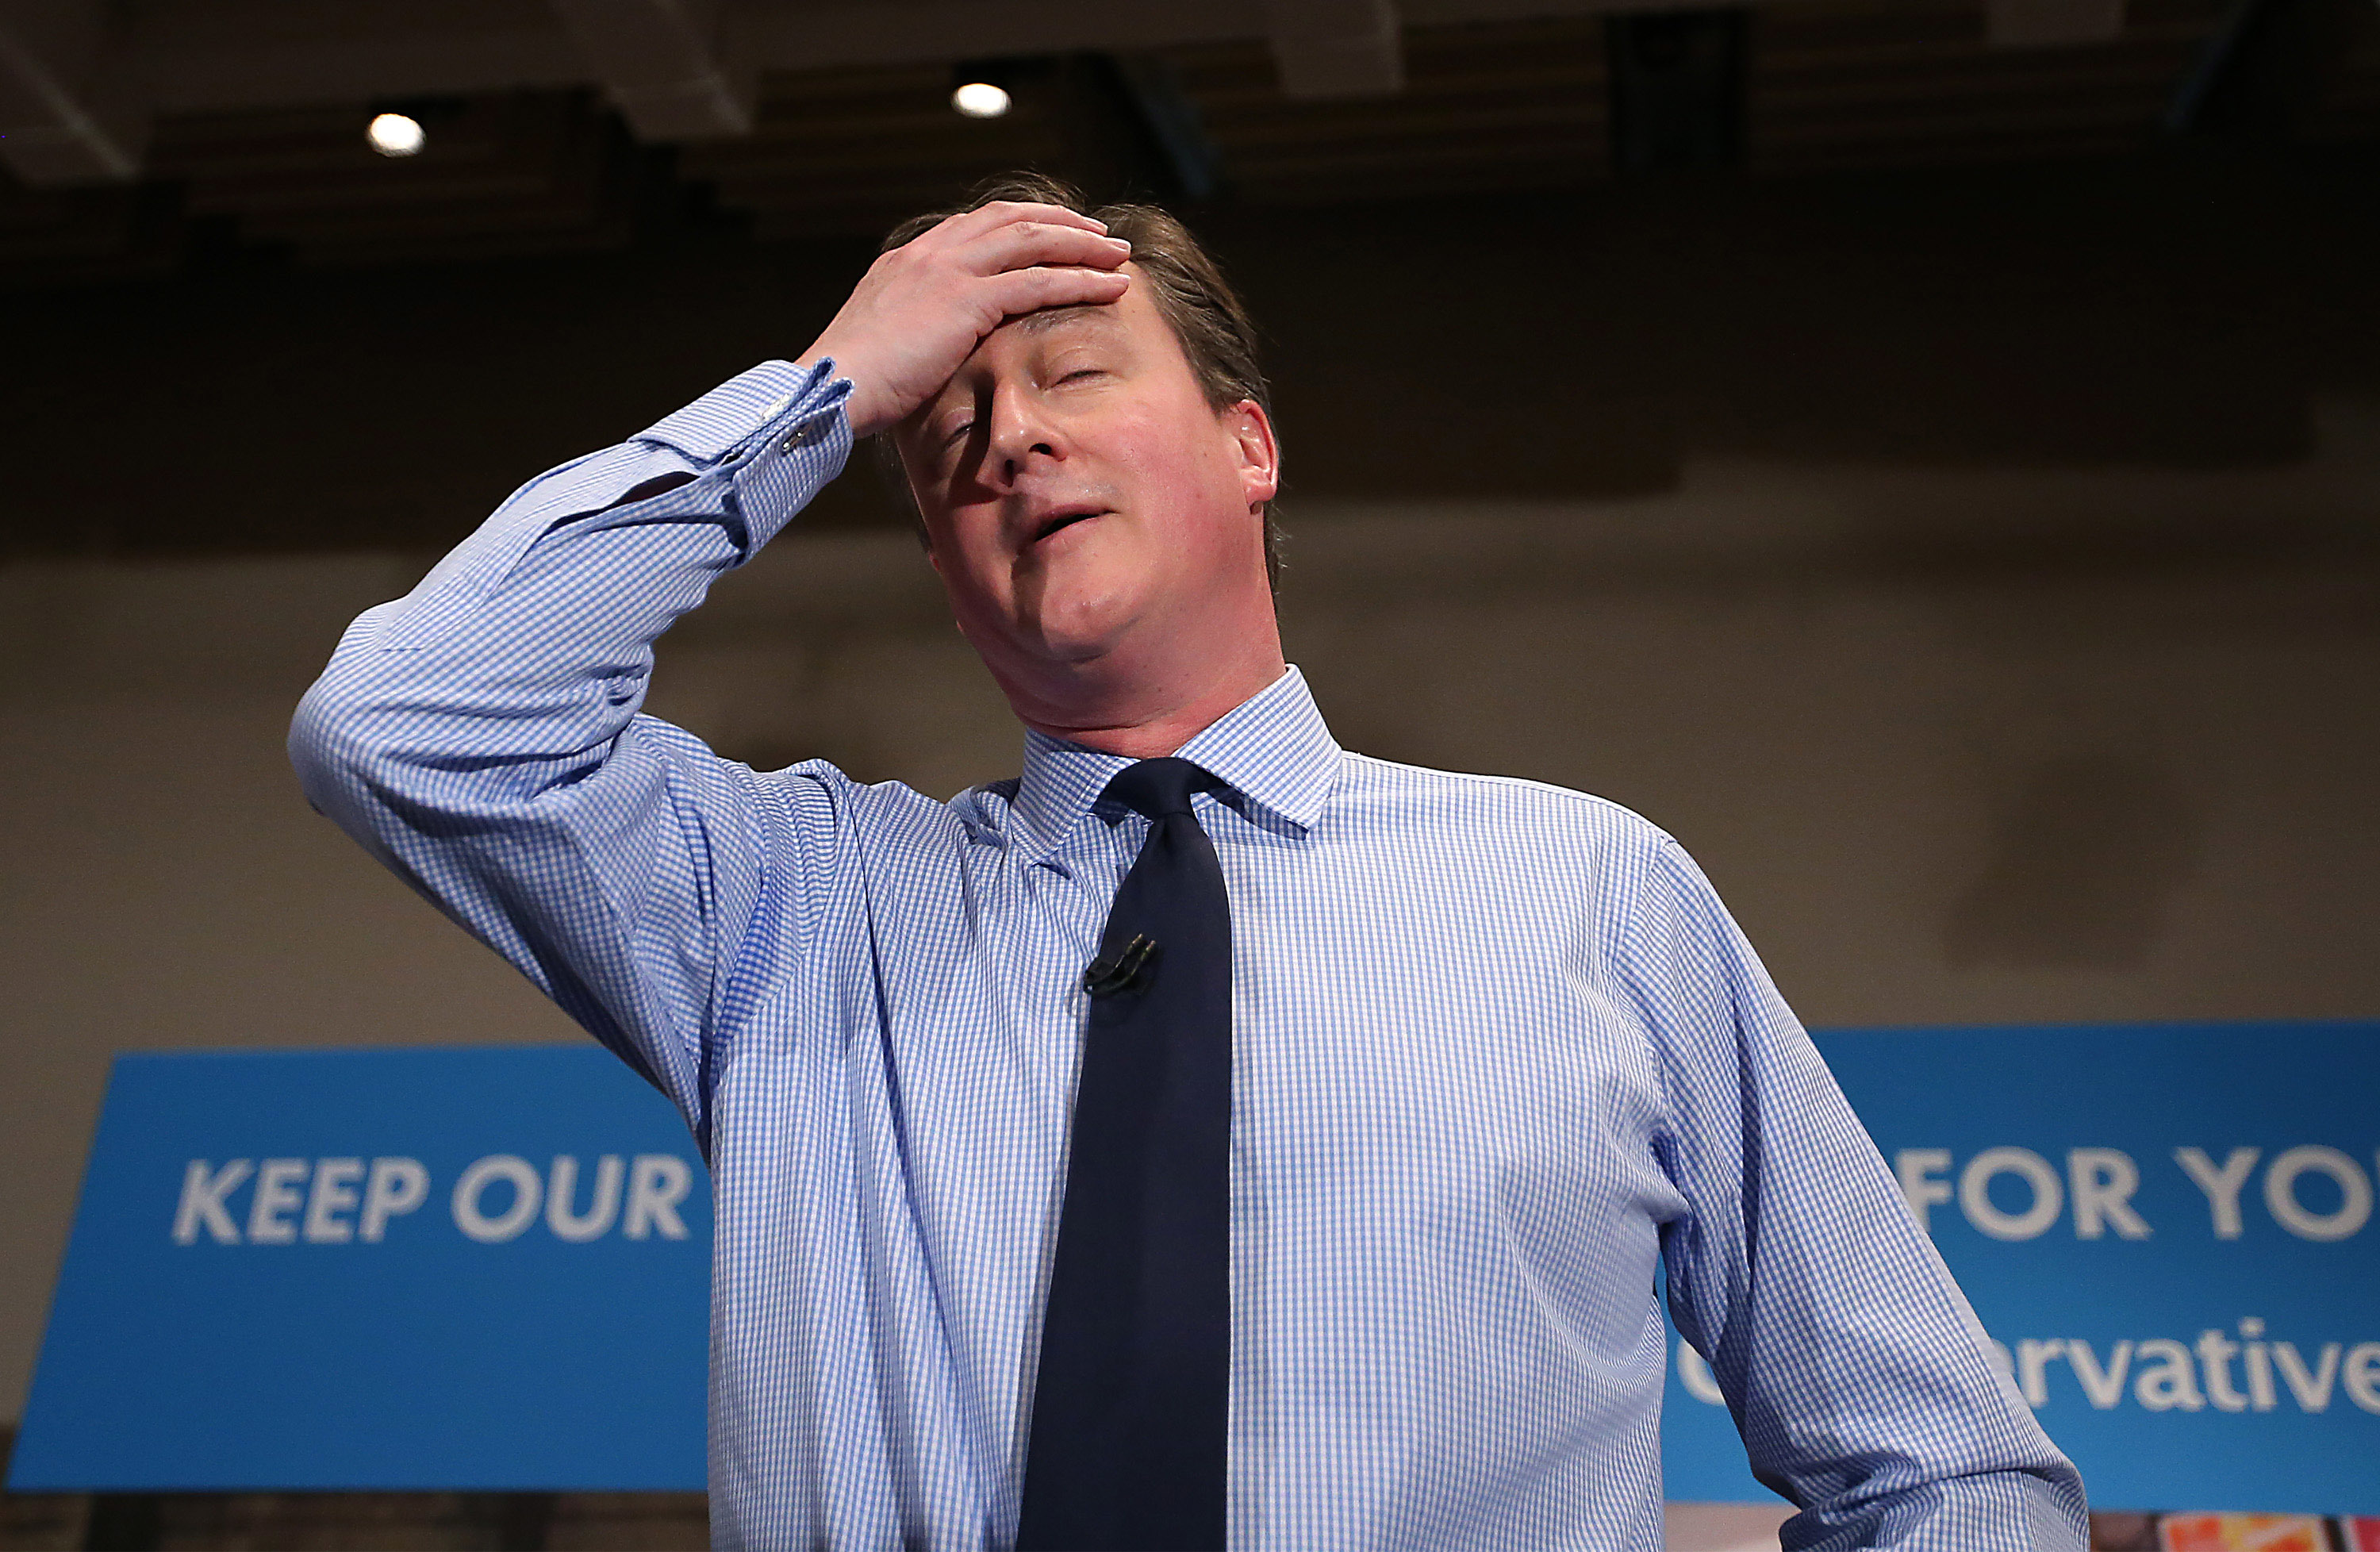 David Cameron (Peter Macdiarmid/Getty Images)